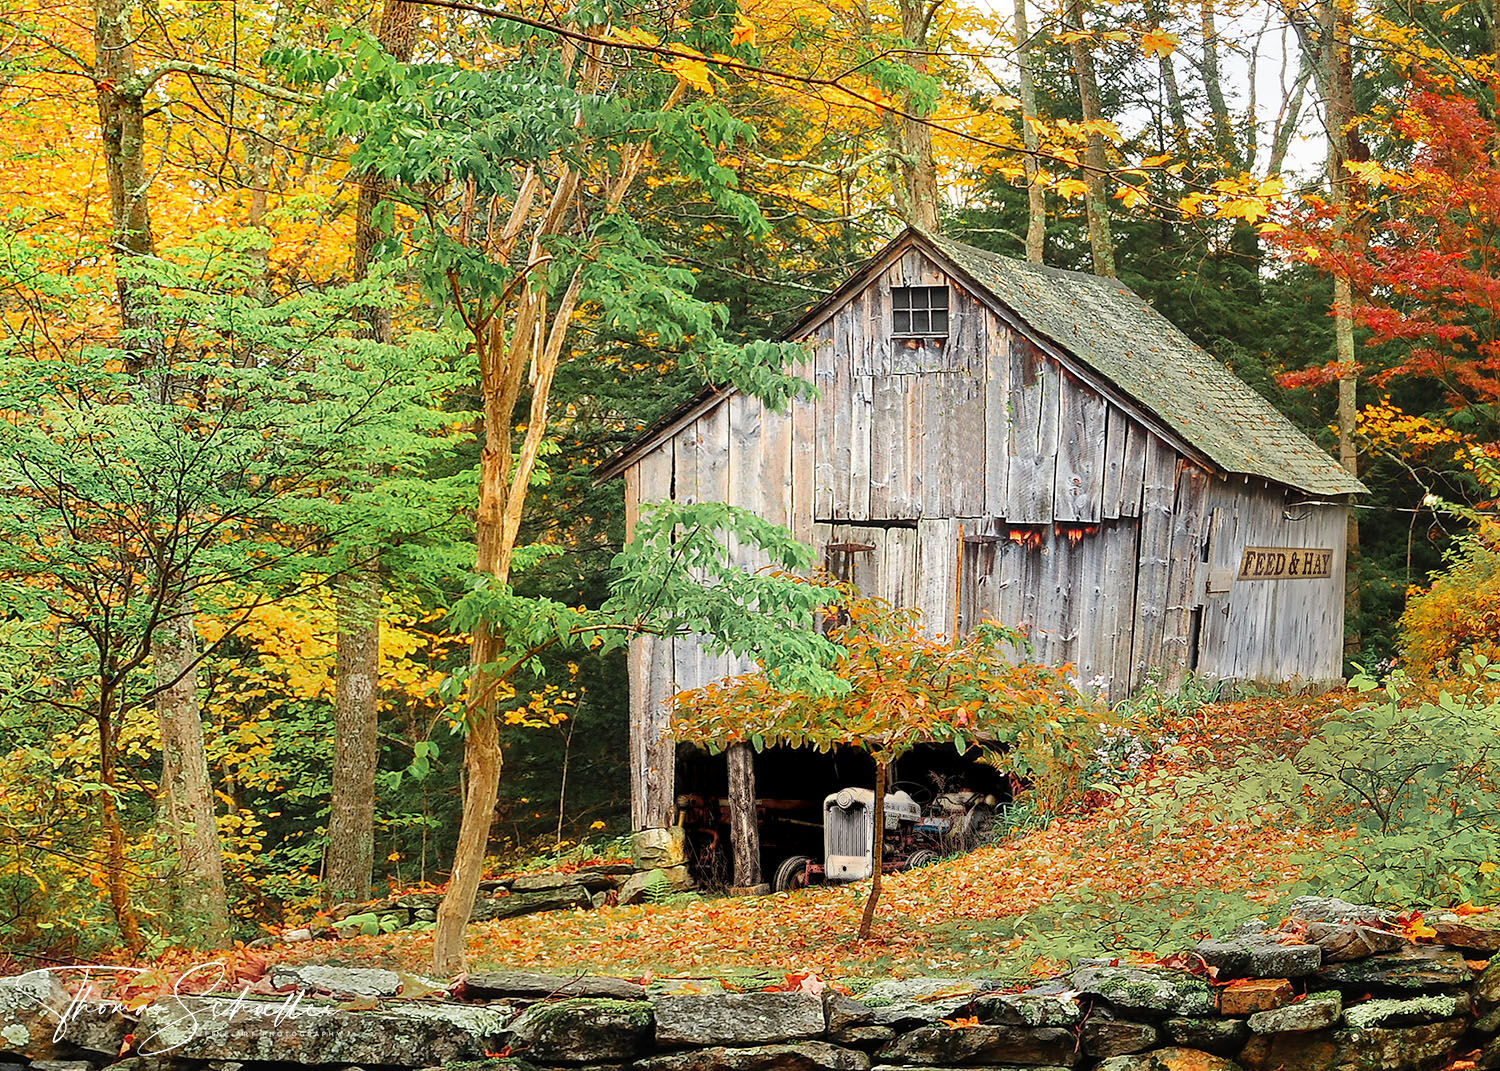 A charming rustic barn under a colorful canopy of fall foliage in Connecticut's remote northwest corner | Connecticut fine art prints & stock photos